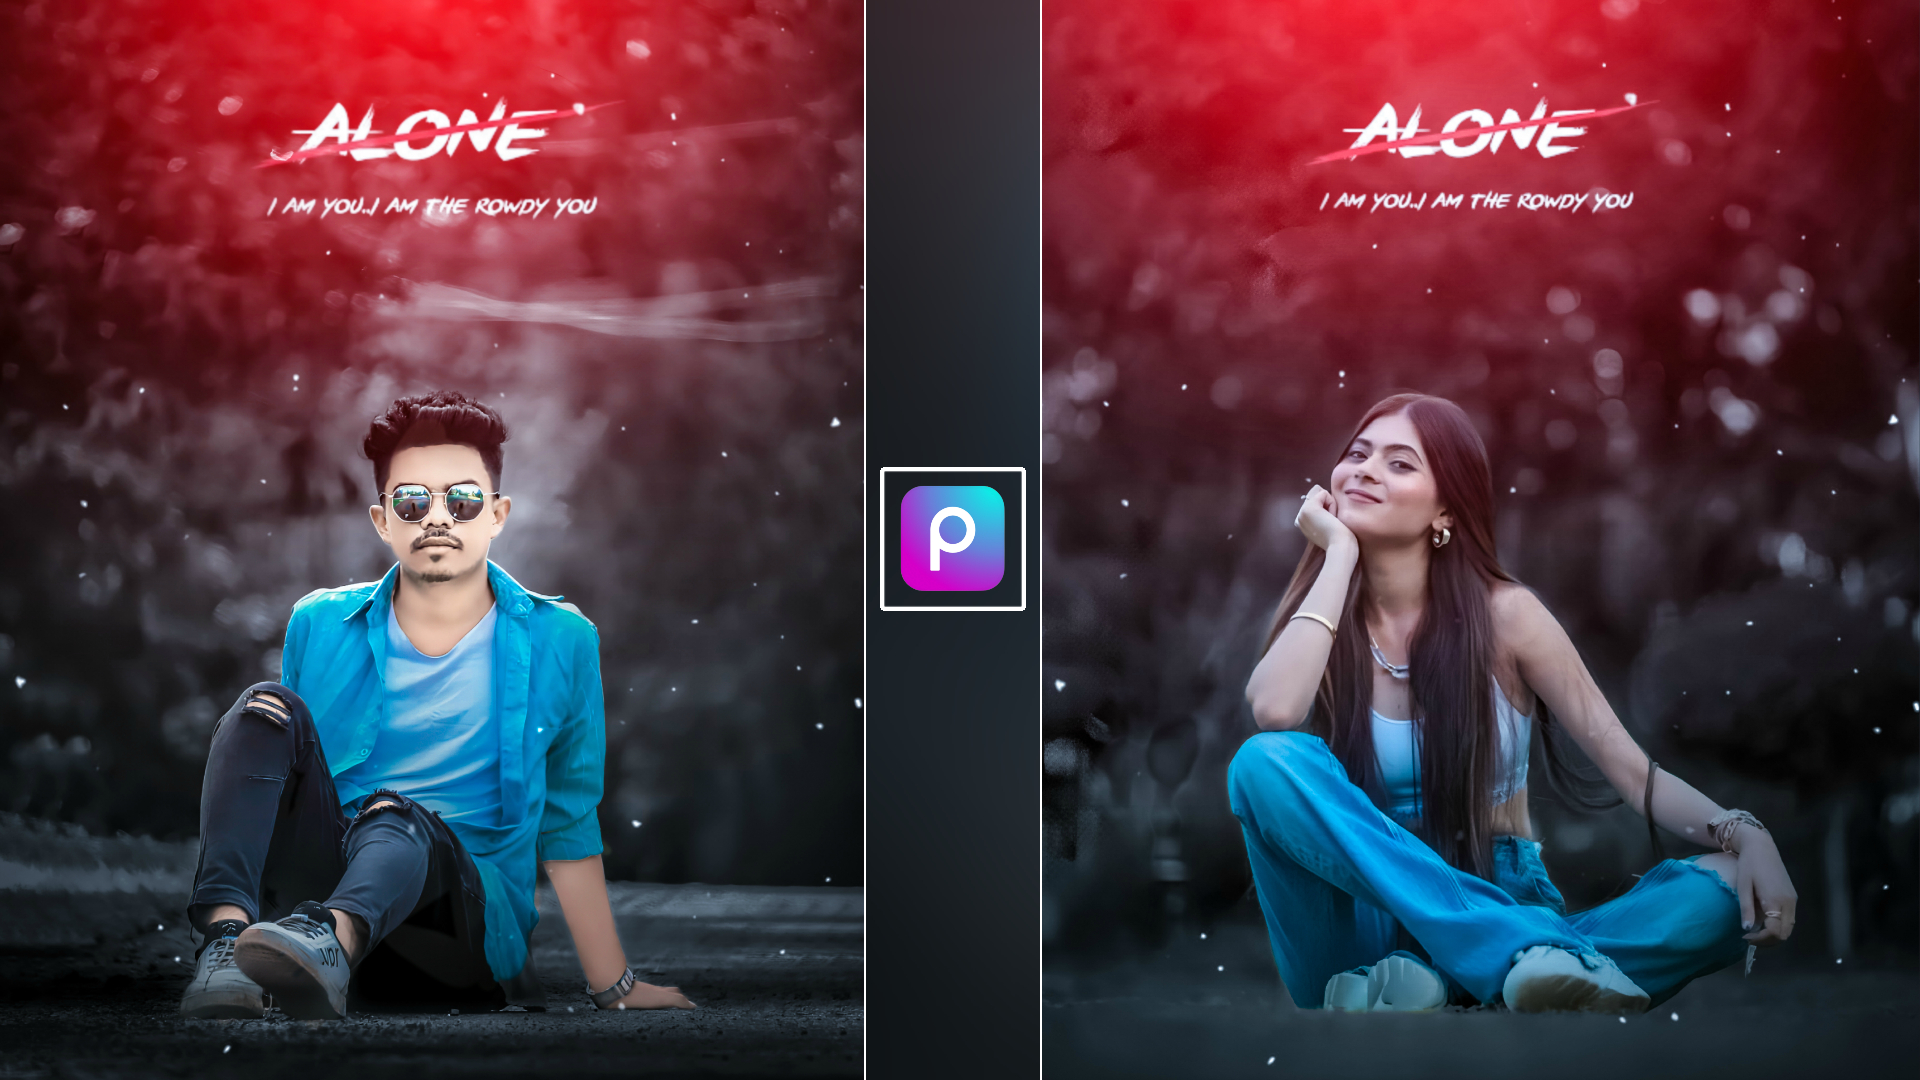 DJ PHOTO EDITING - Download Unlimited Full HD Background And PNG, Lightroom  Presets & Photo Editing Apps Free